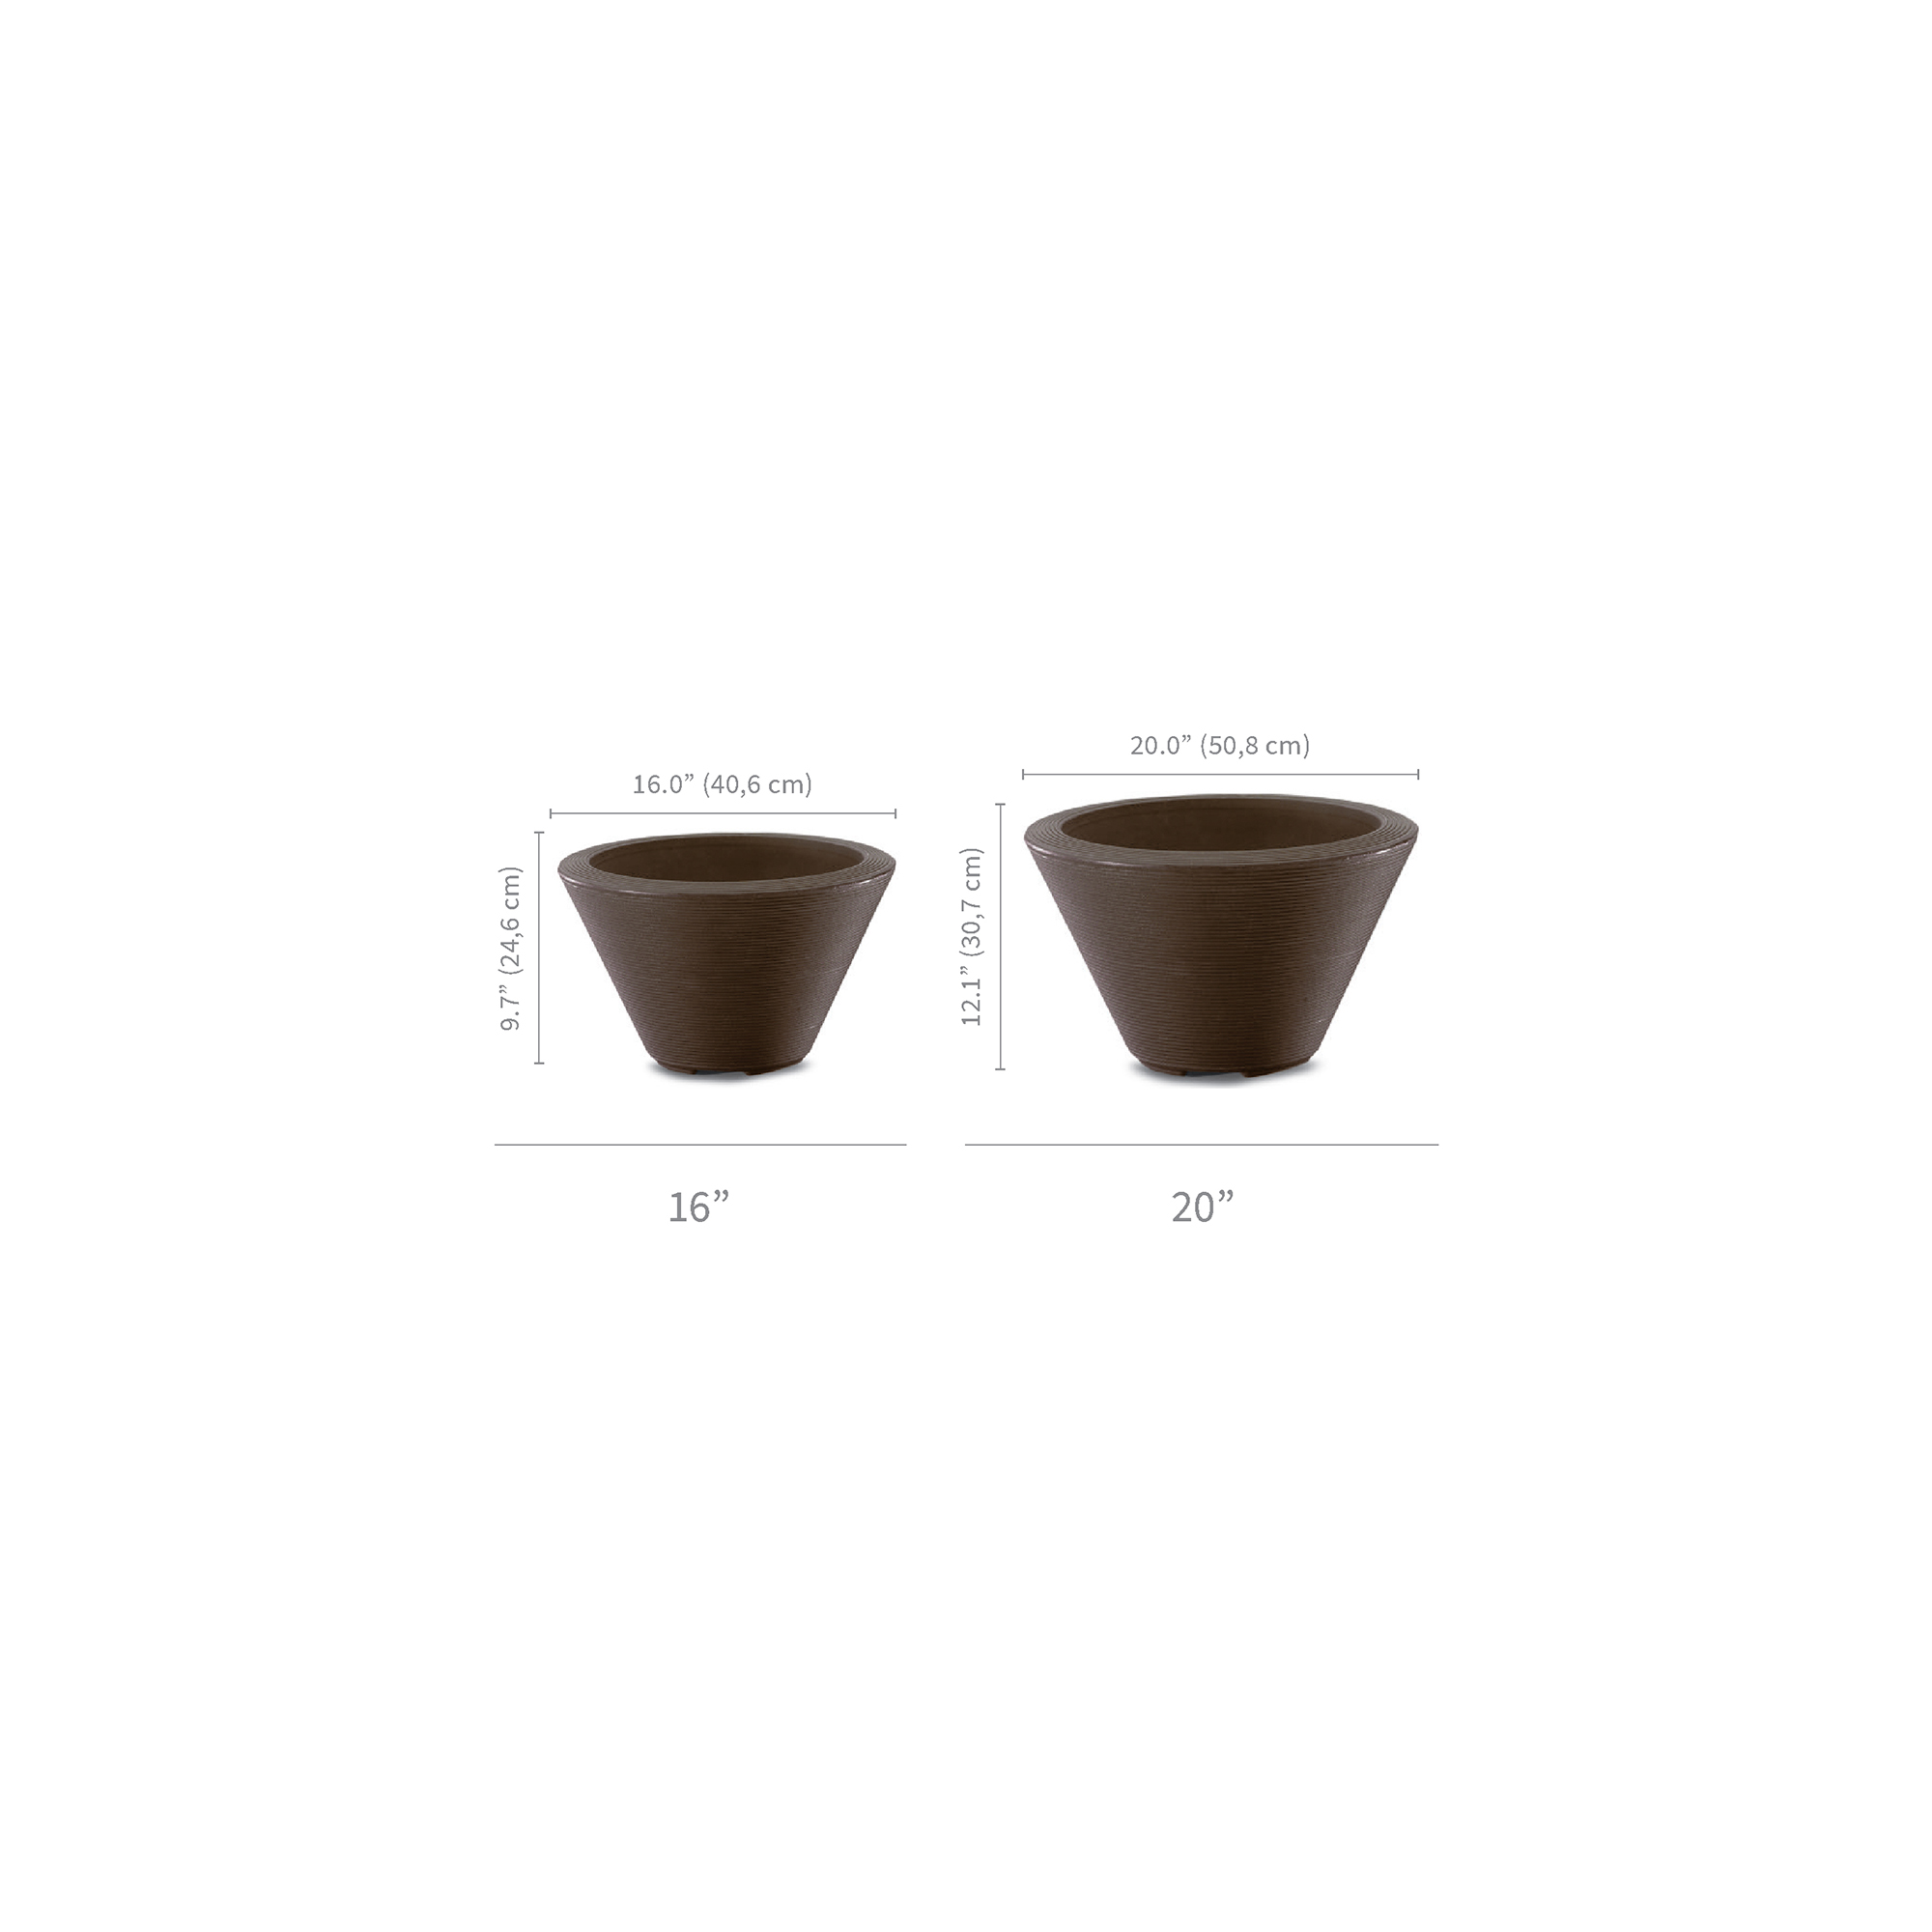 Gramercy Round planters specifications